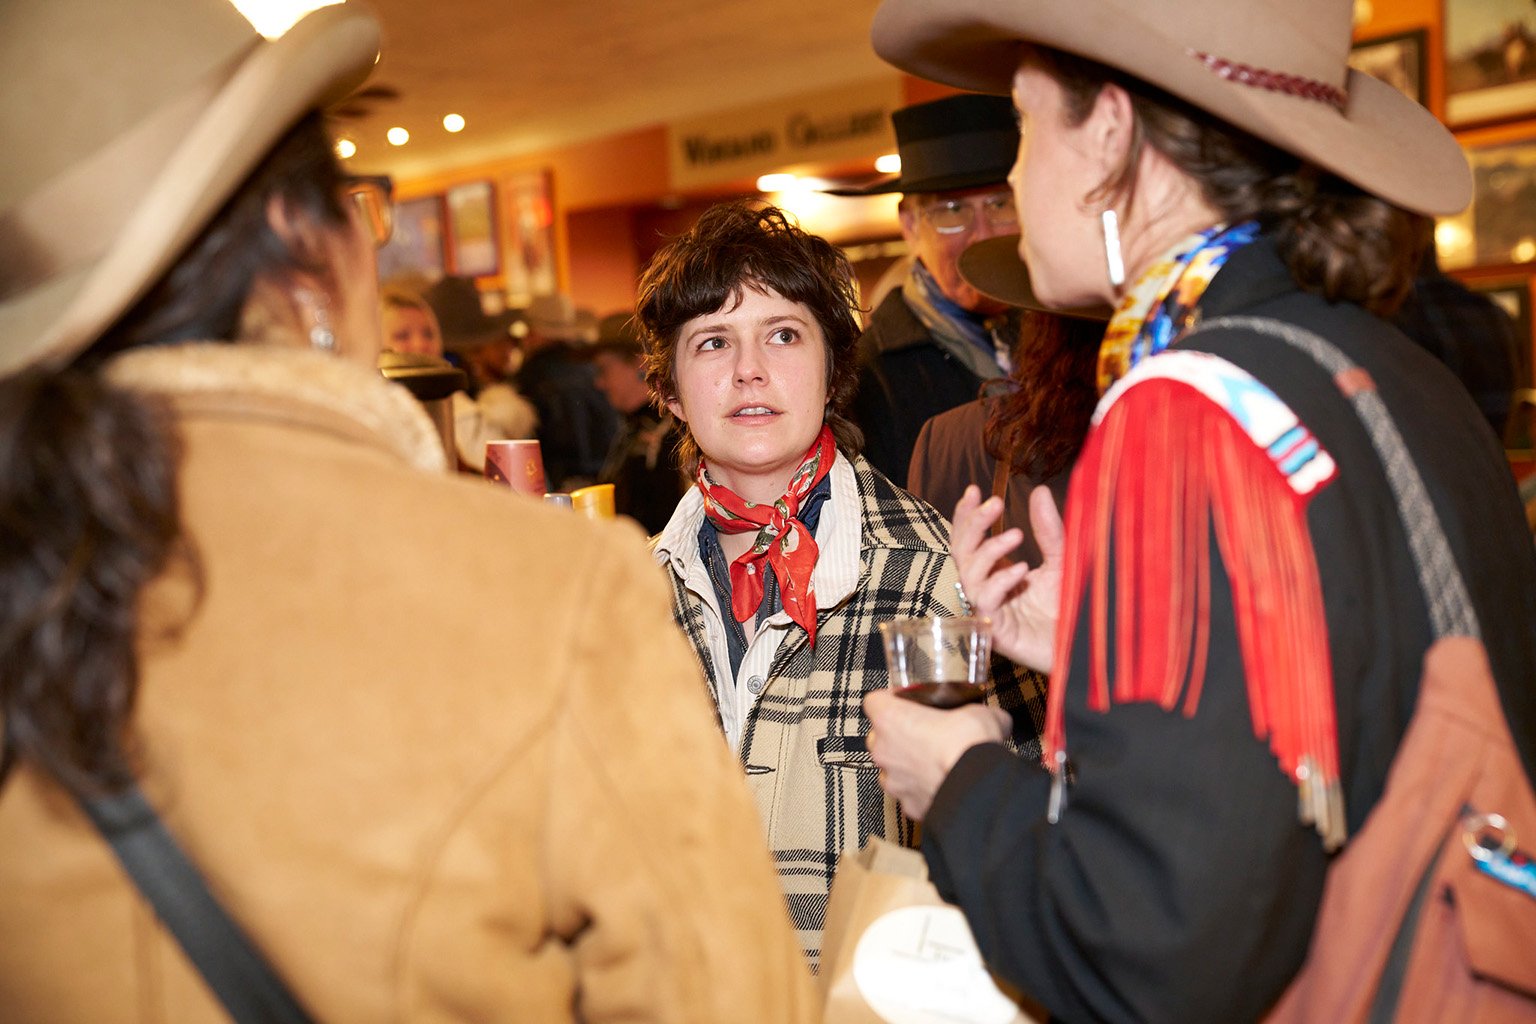 Ismay and Lara Manzanares in conversation in the Pioneer Saloon. Photo by Marla Aufmuth